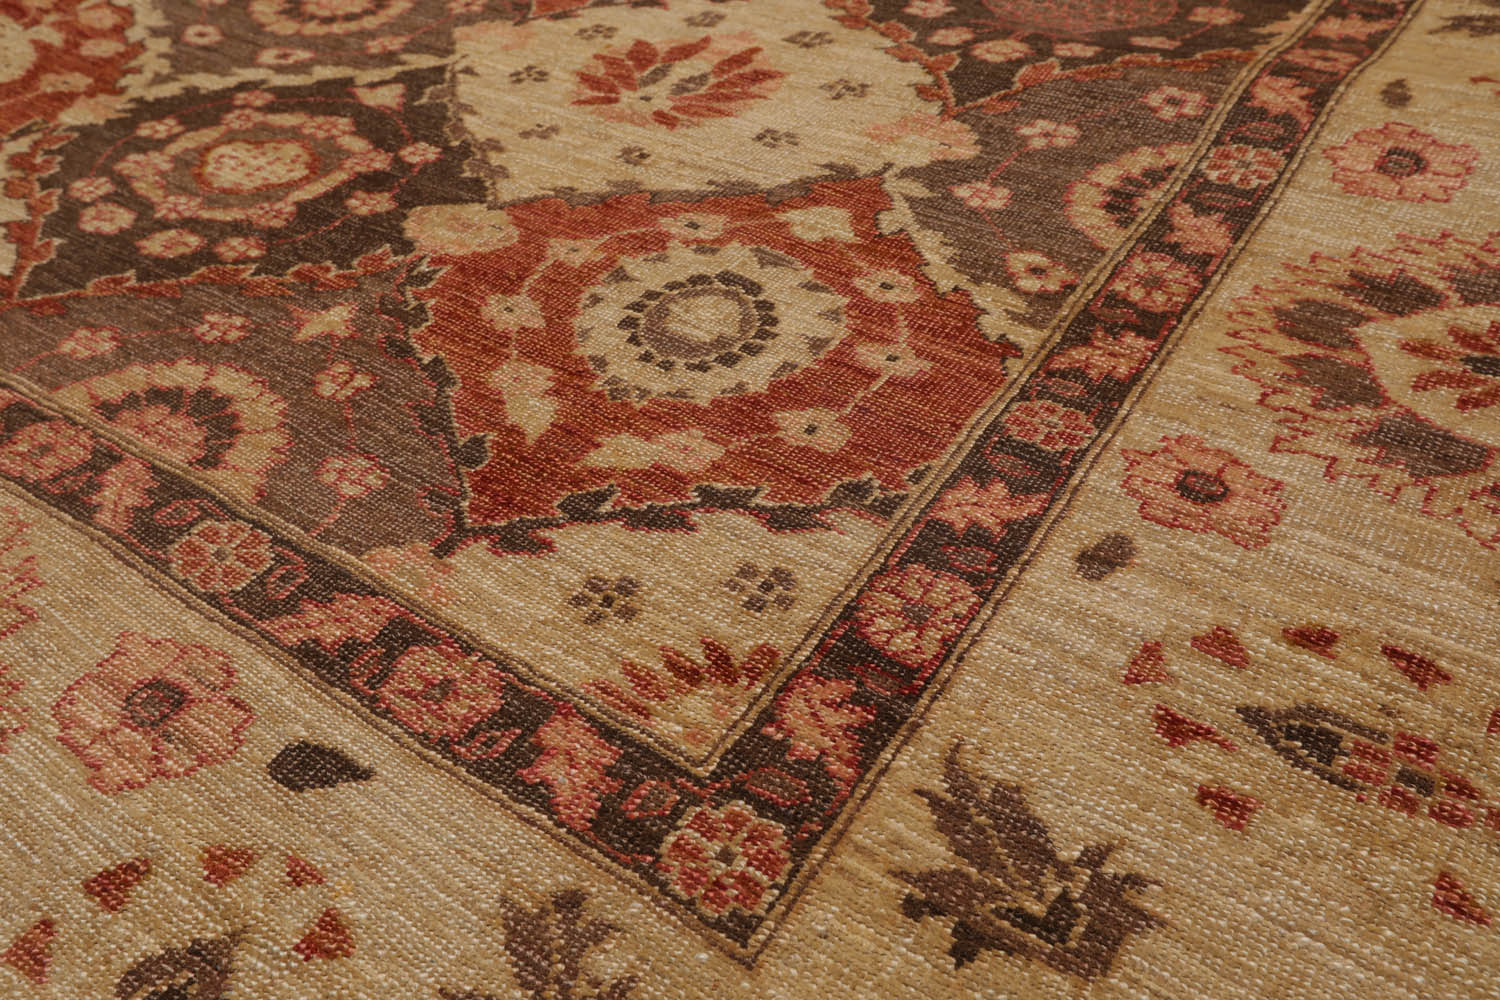 Onye 8x10 Hand Knotted 100% Wool Peshawar Traditional Oriental Area Rug Tan, Brown Color